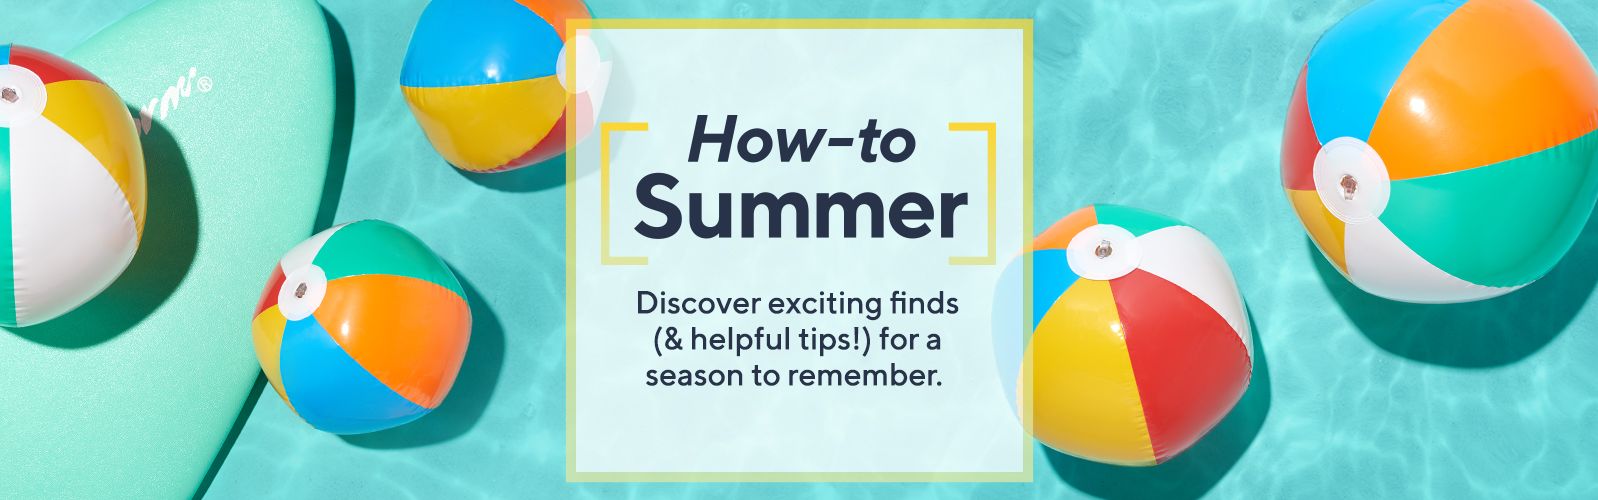 How-to-Summer: Discover exciting finds (& helpful tips!) for a season to remember. 